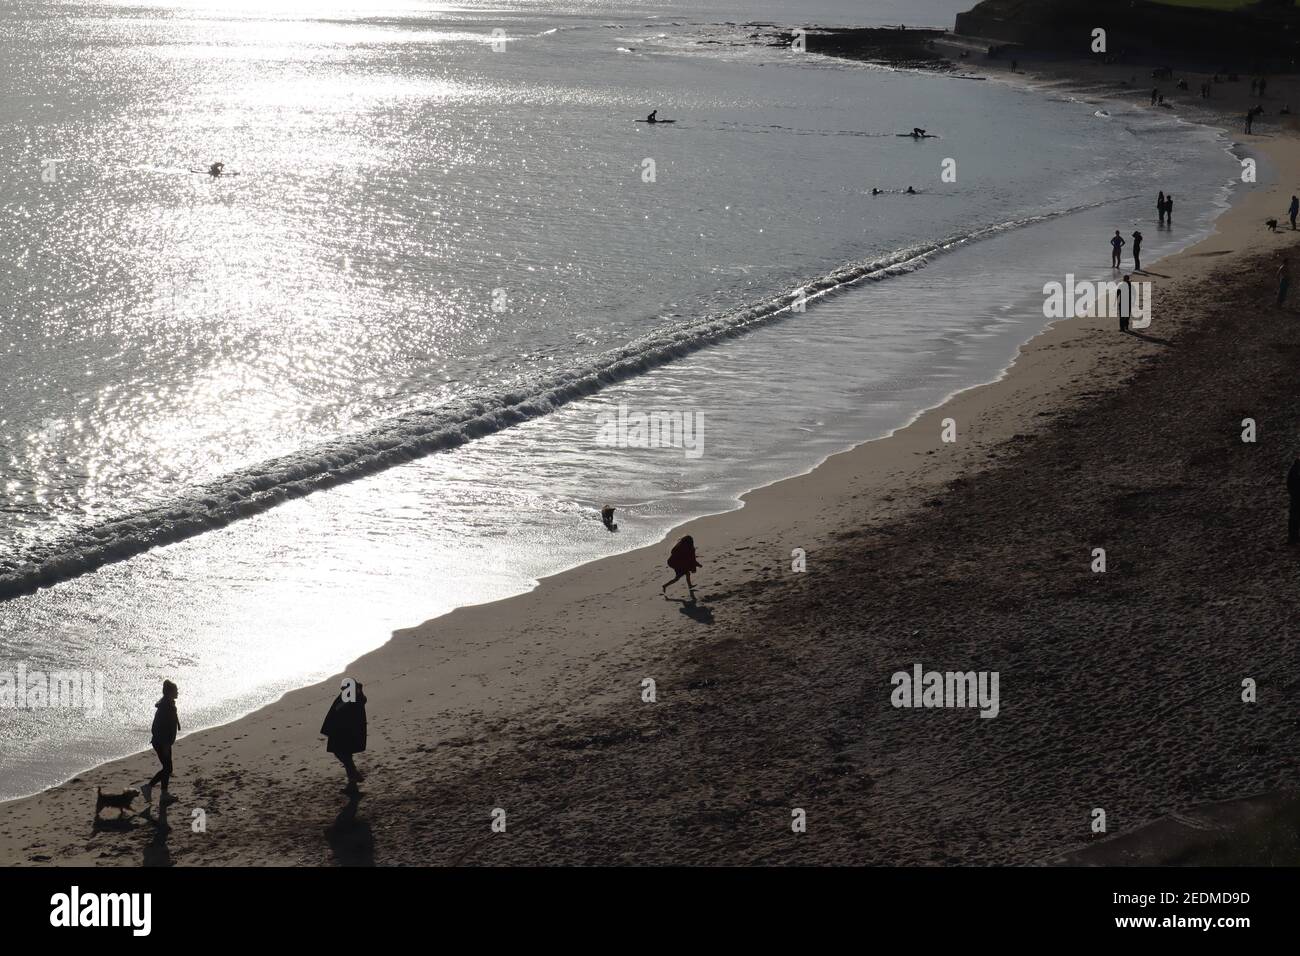 Falmouth seafront Gyllyngvase Beach, winter sunshine during lockdown, living a healthy life Stock Photo